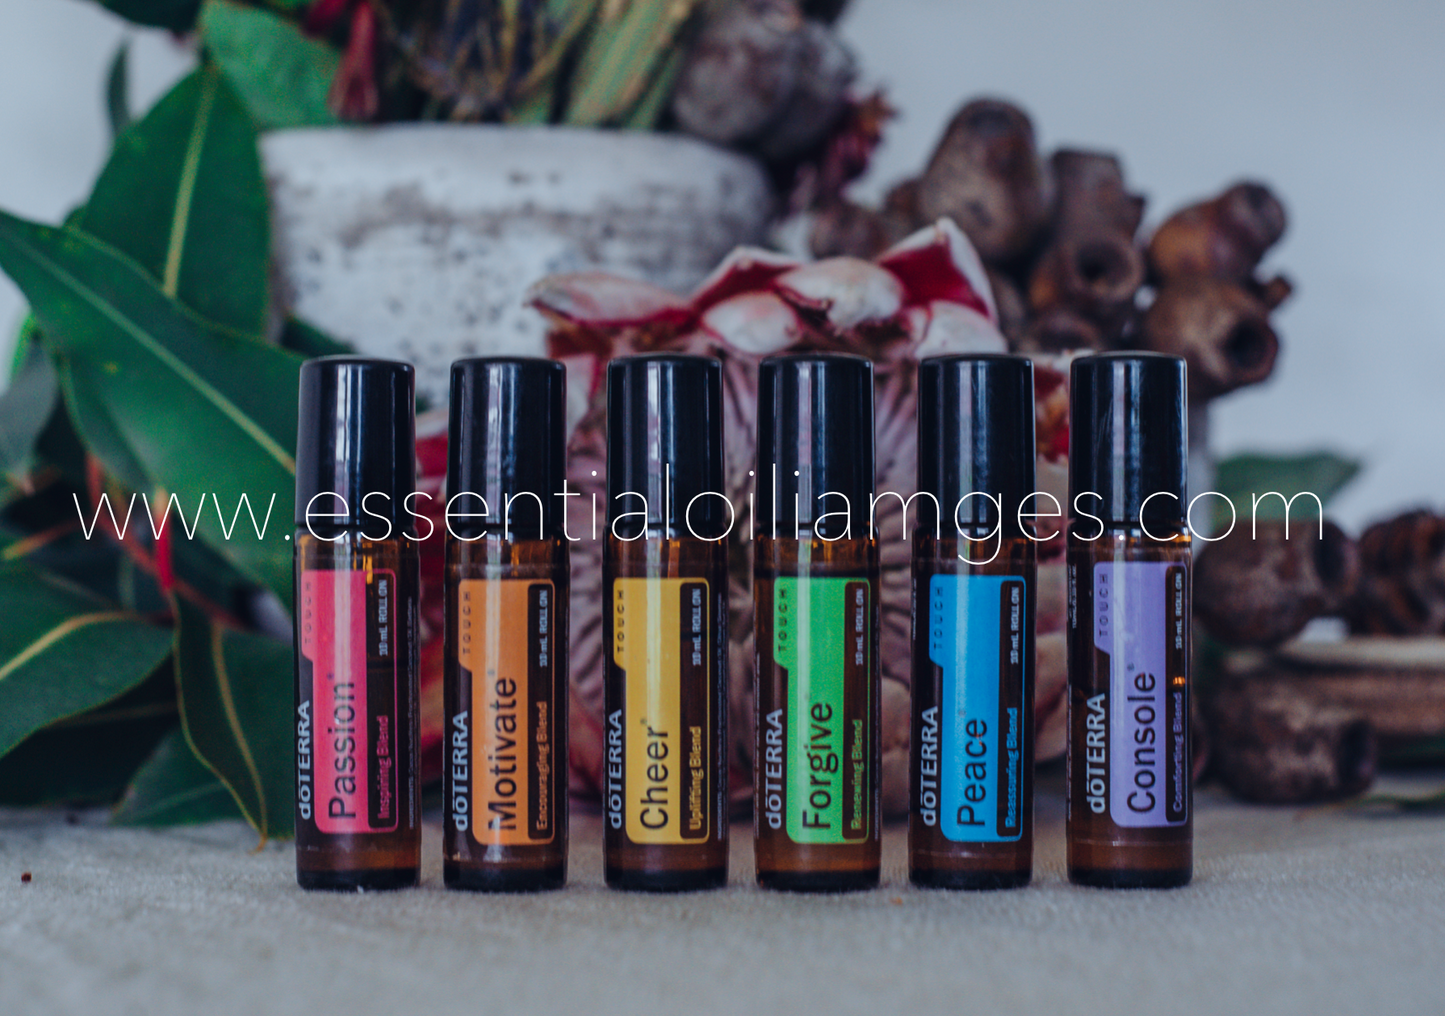 The Native Emotional Aromatherapy Touch Collection